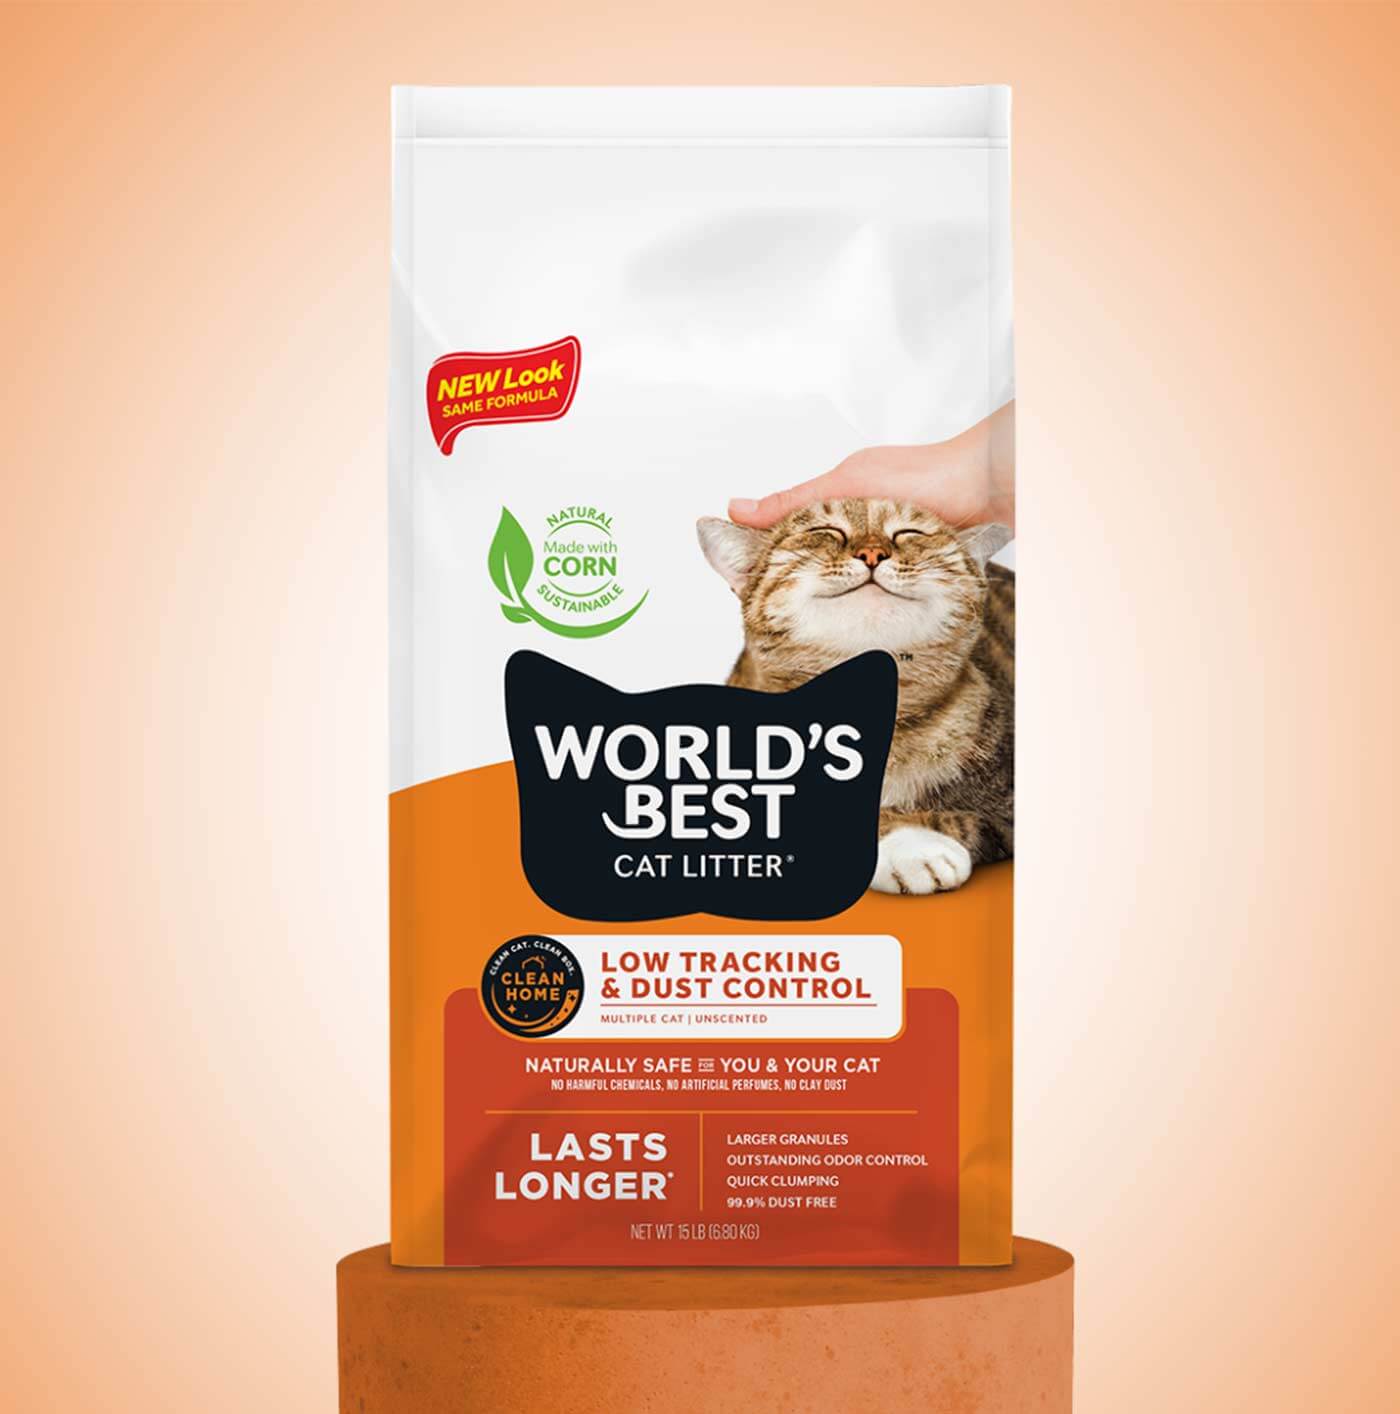 World's Best Cat Litter - Low Tracking & Dust Control